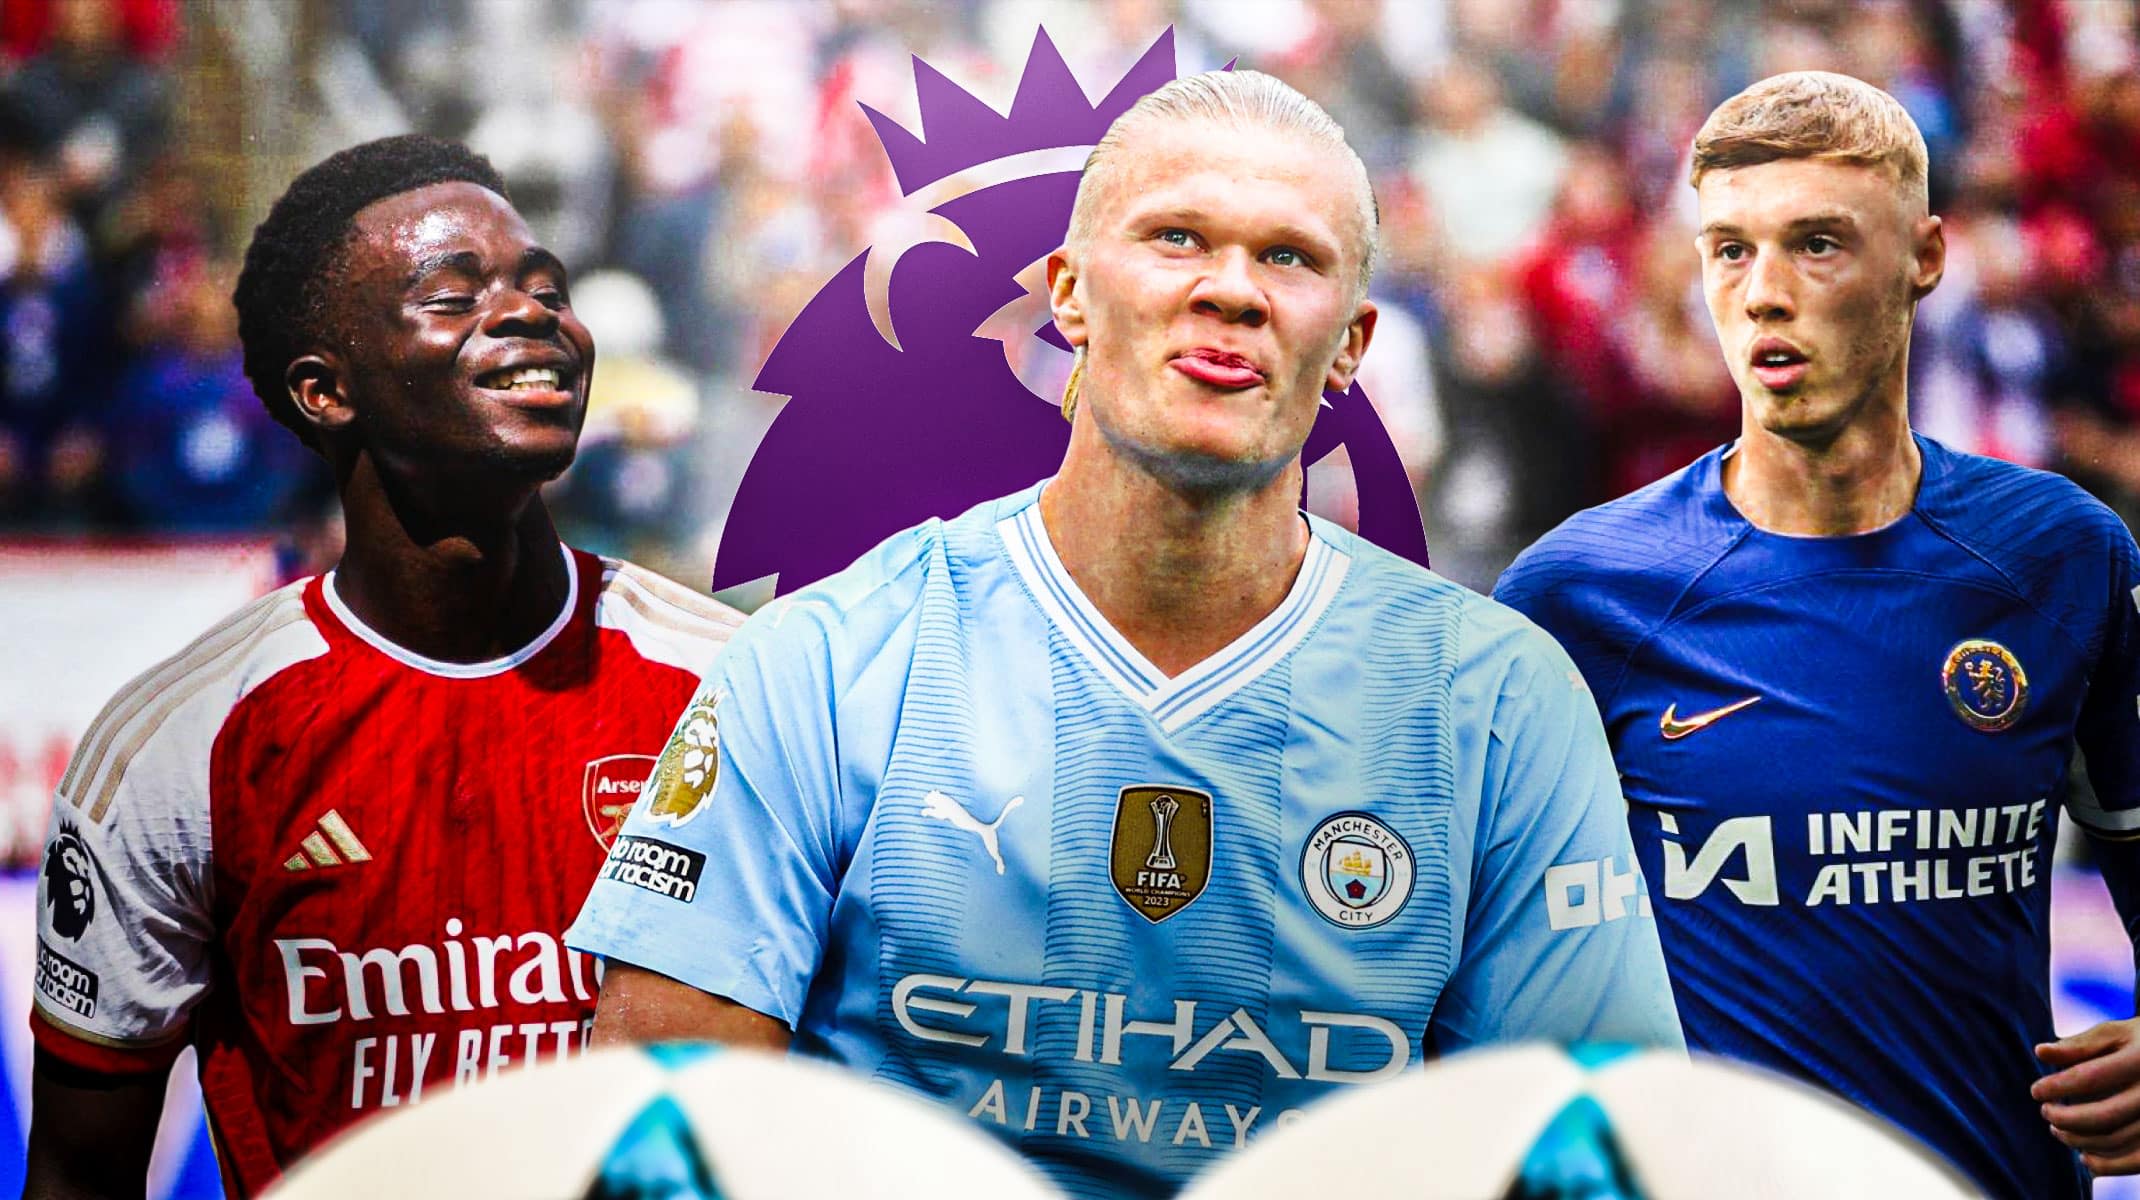 Who will be the Premier League's Young Player of the Season?